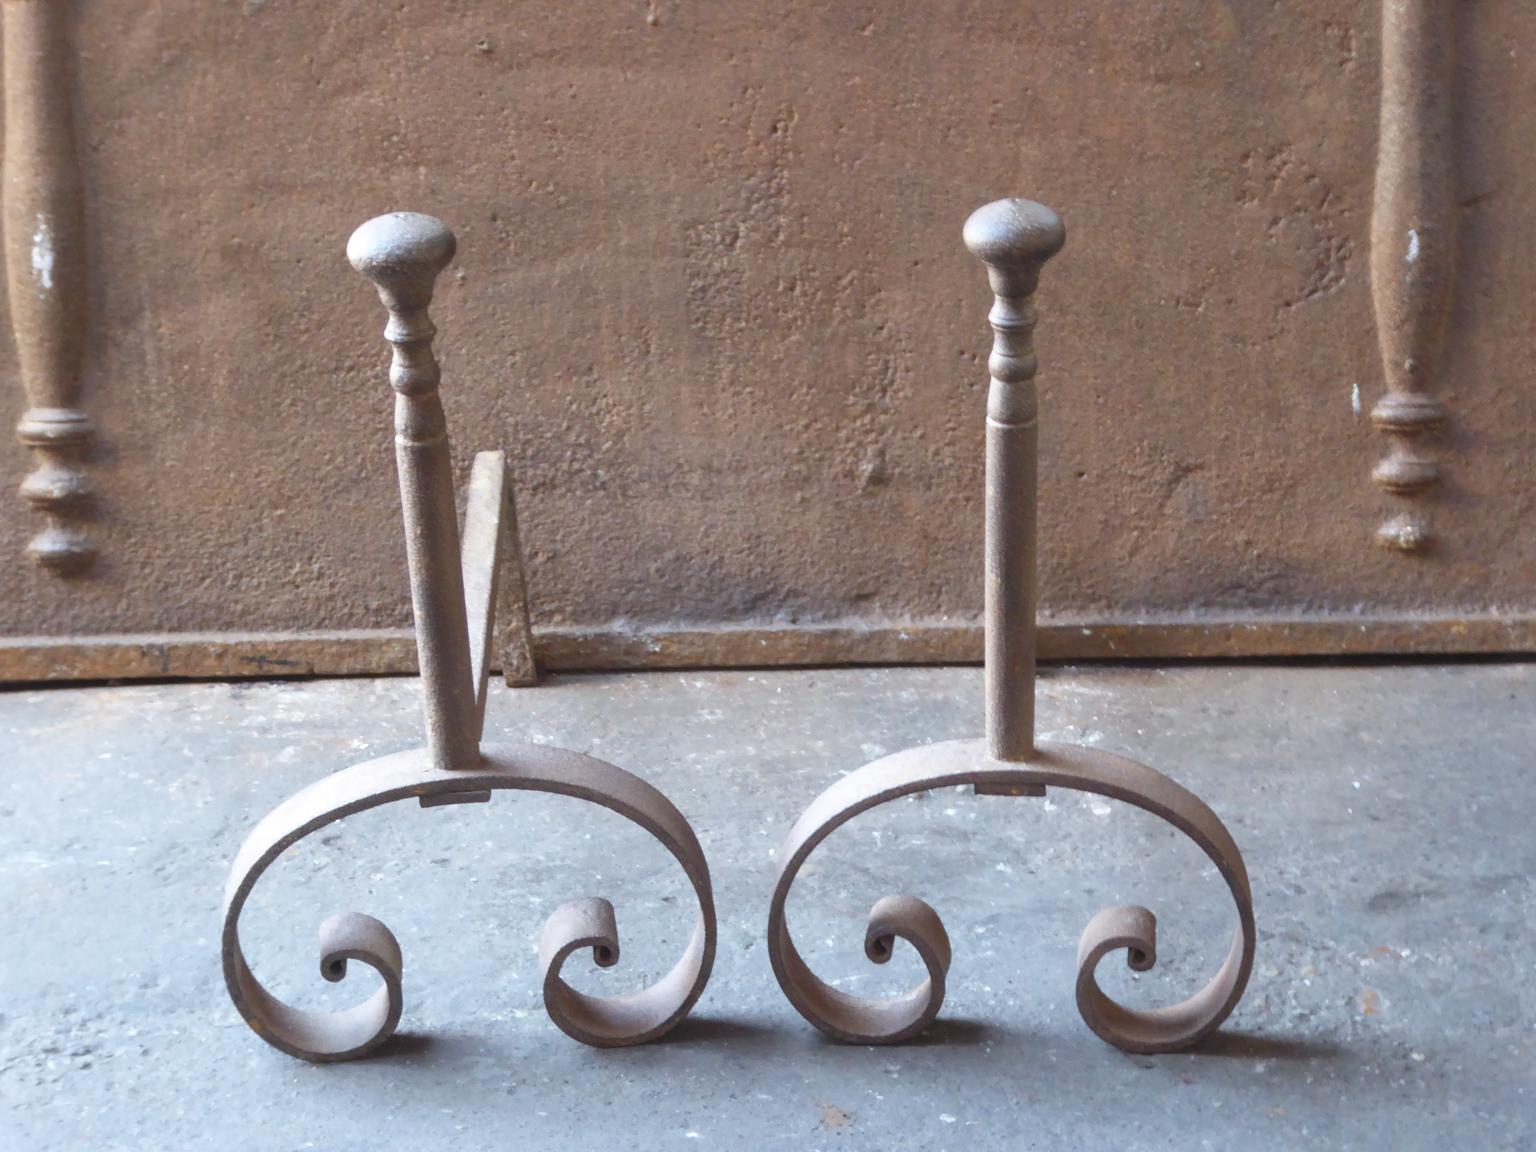 19th century French Napoleon III andirons made of hand forged wrought iron. The andirons are in a good condition and fit for use in the fireplace.